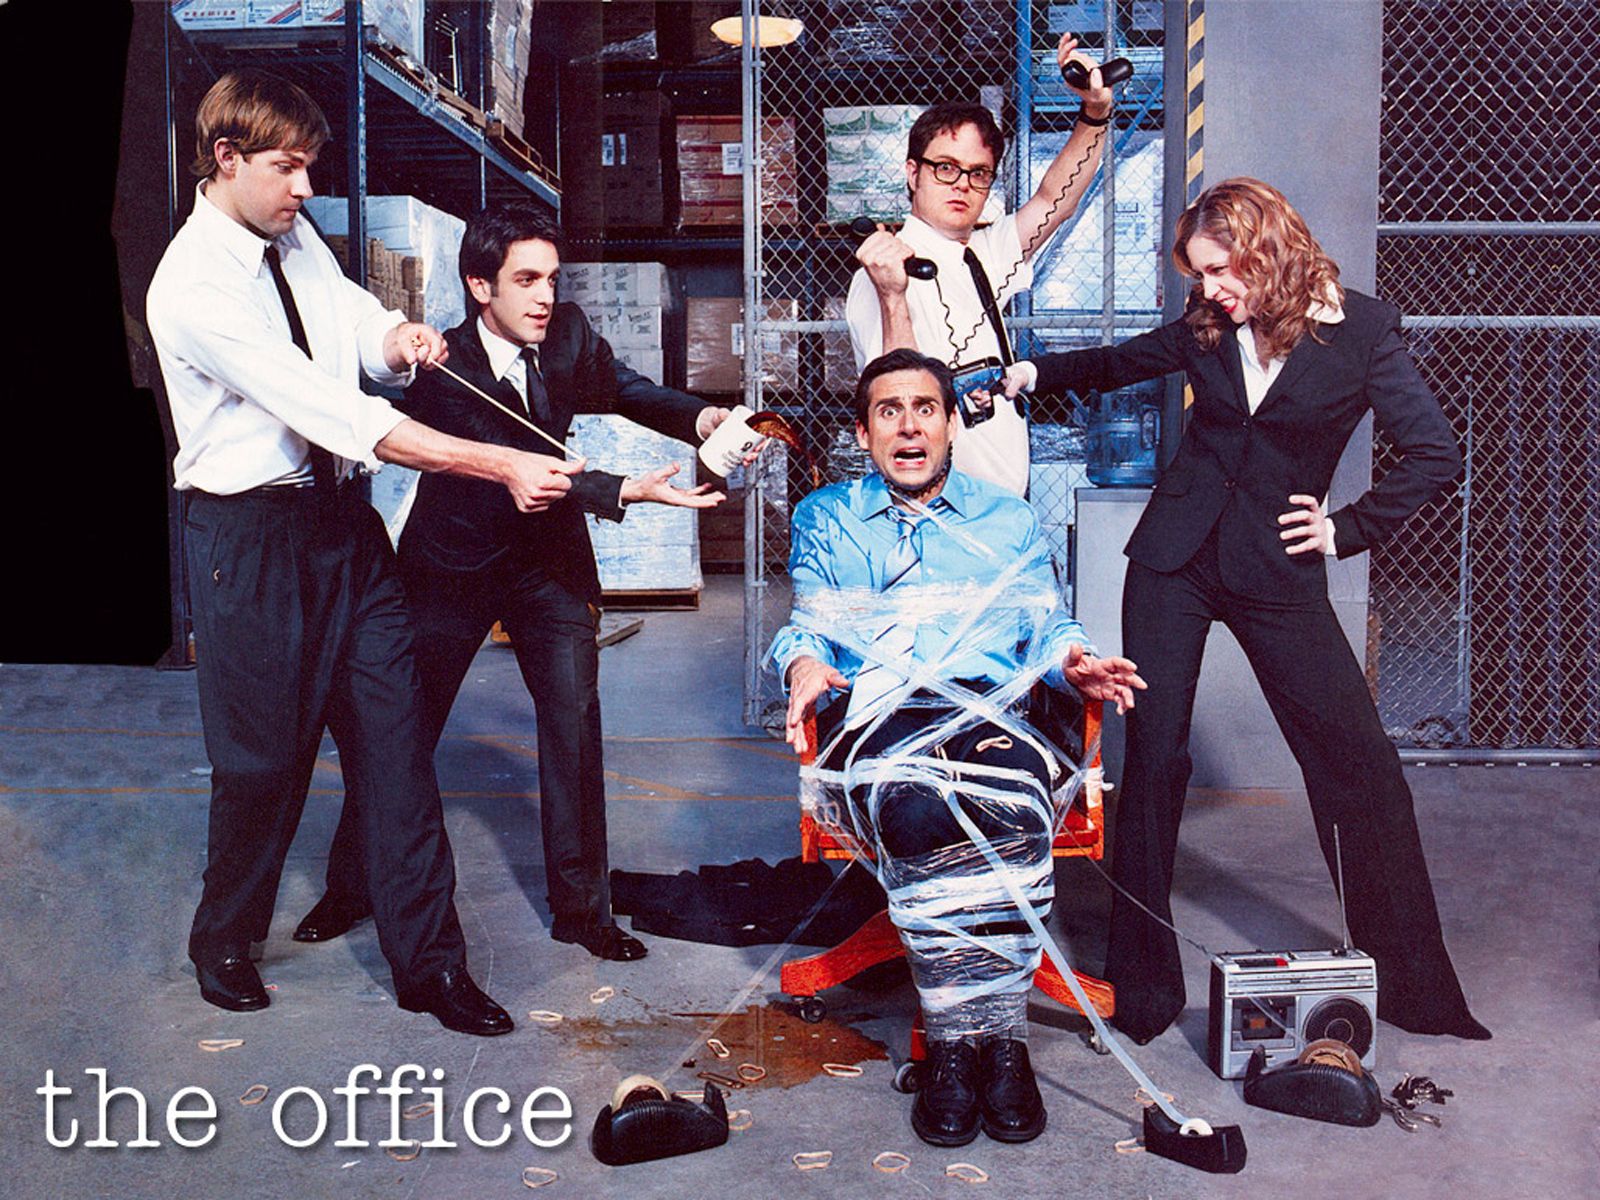 The Office cast members with Michael Scott sitting in a chair wrapped in tape. - The Office